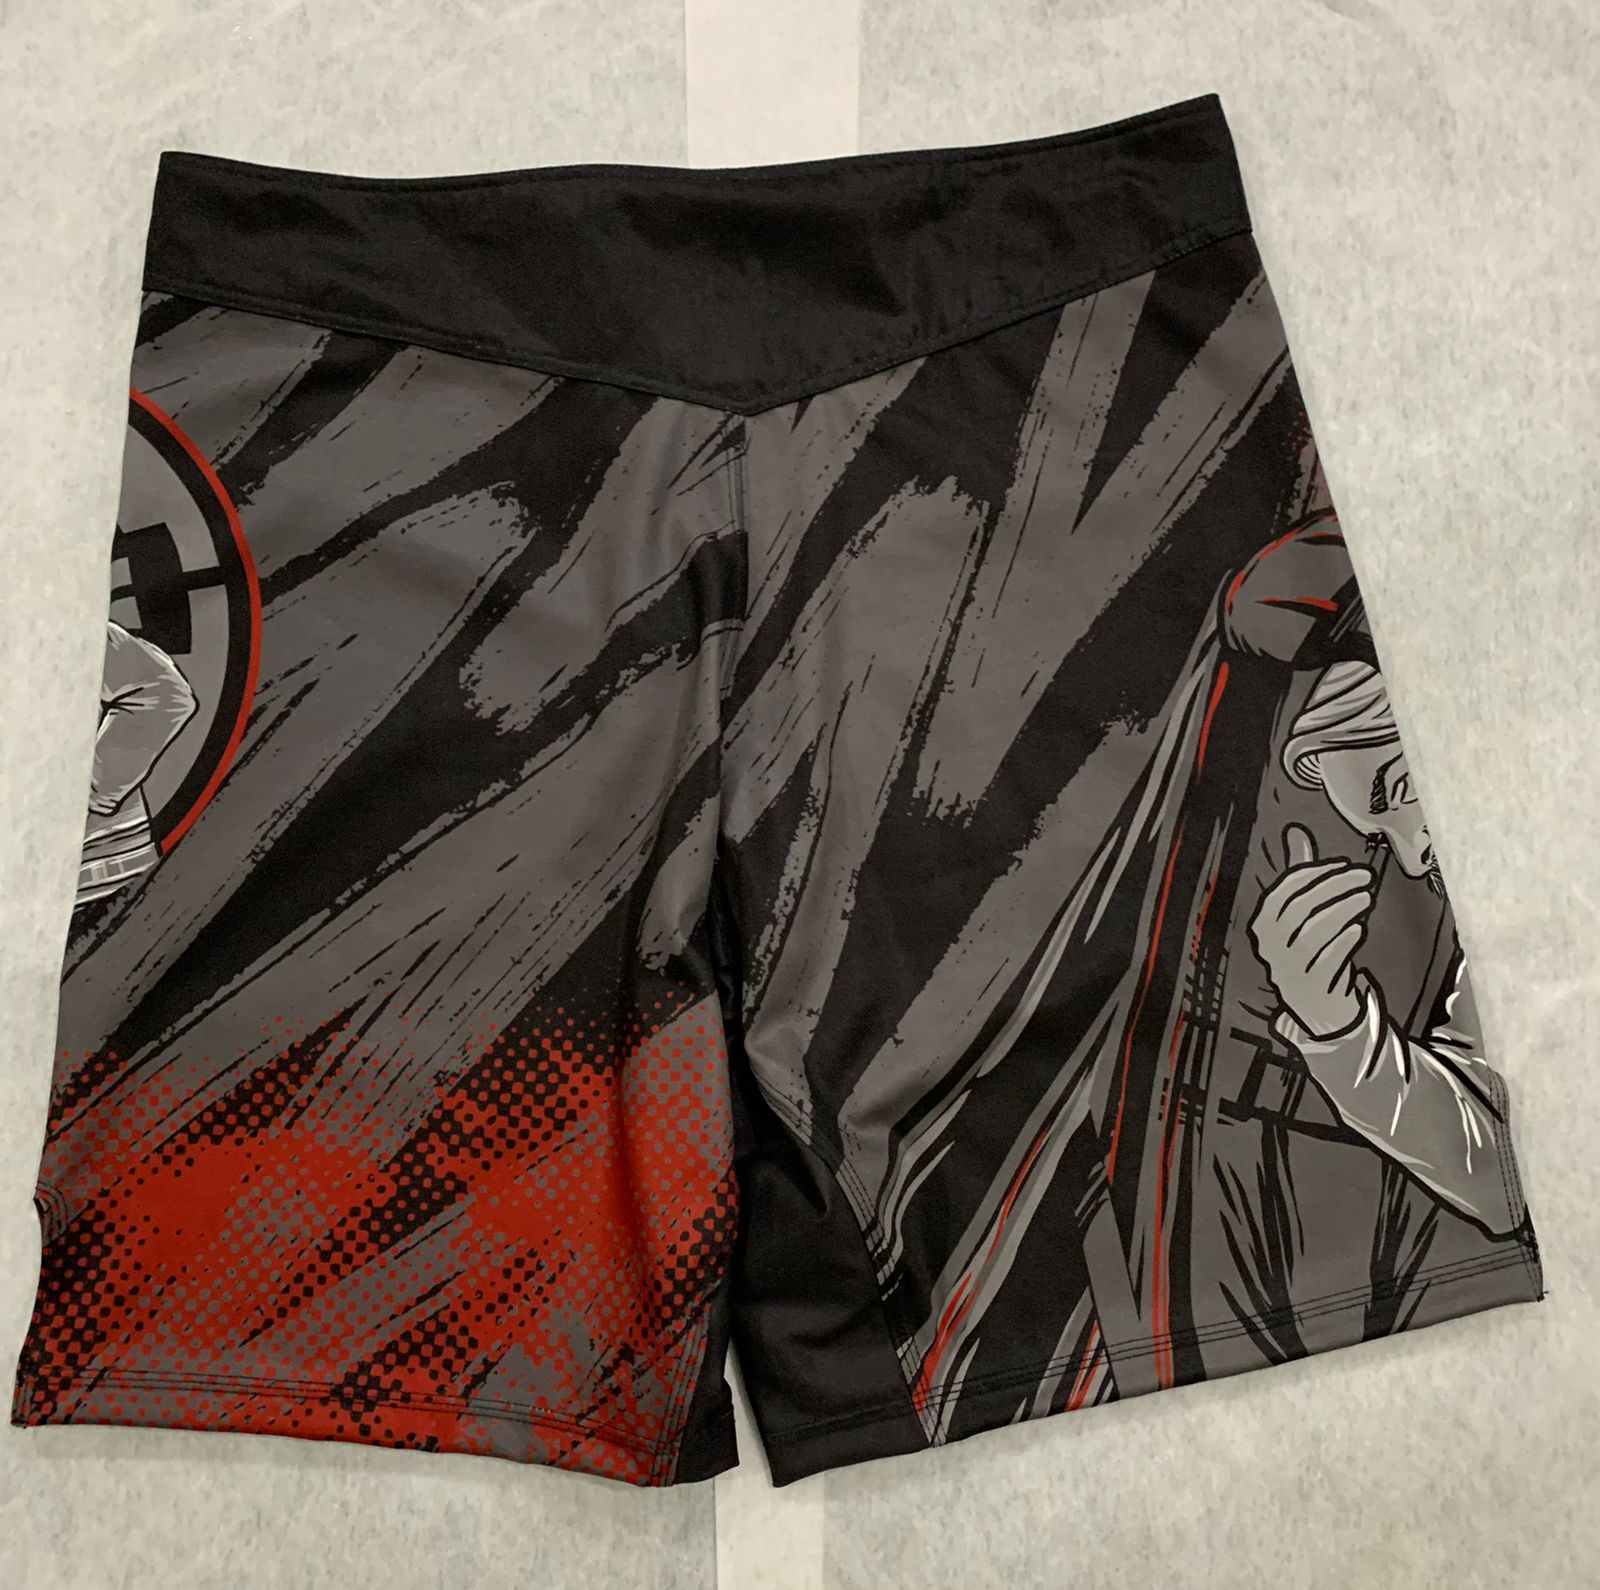 Welcome to the D'arce Side MMA Shorts - TheSevenSubs